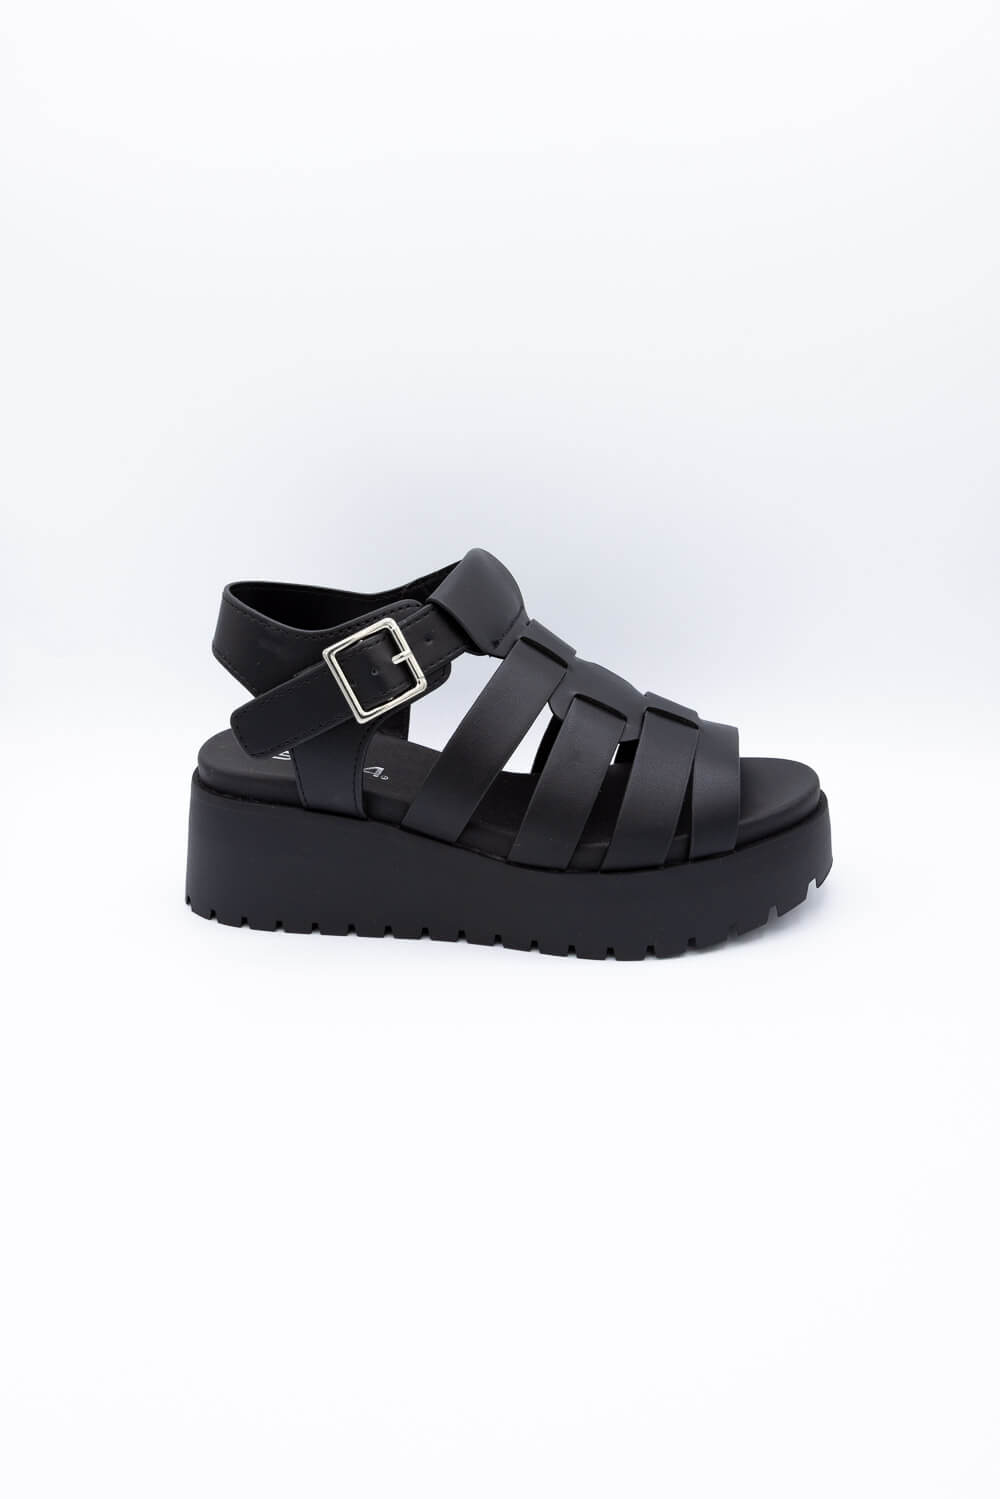 Soda Shoes Pullout Fisherman Lug Sandals for Women in Black | PULLOUT ...